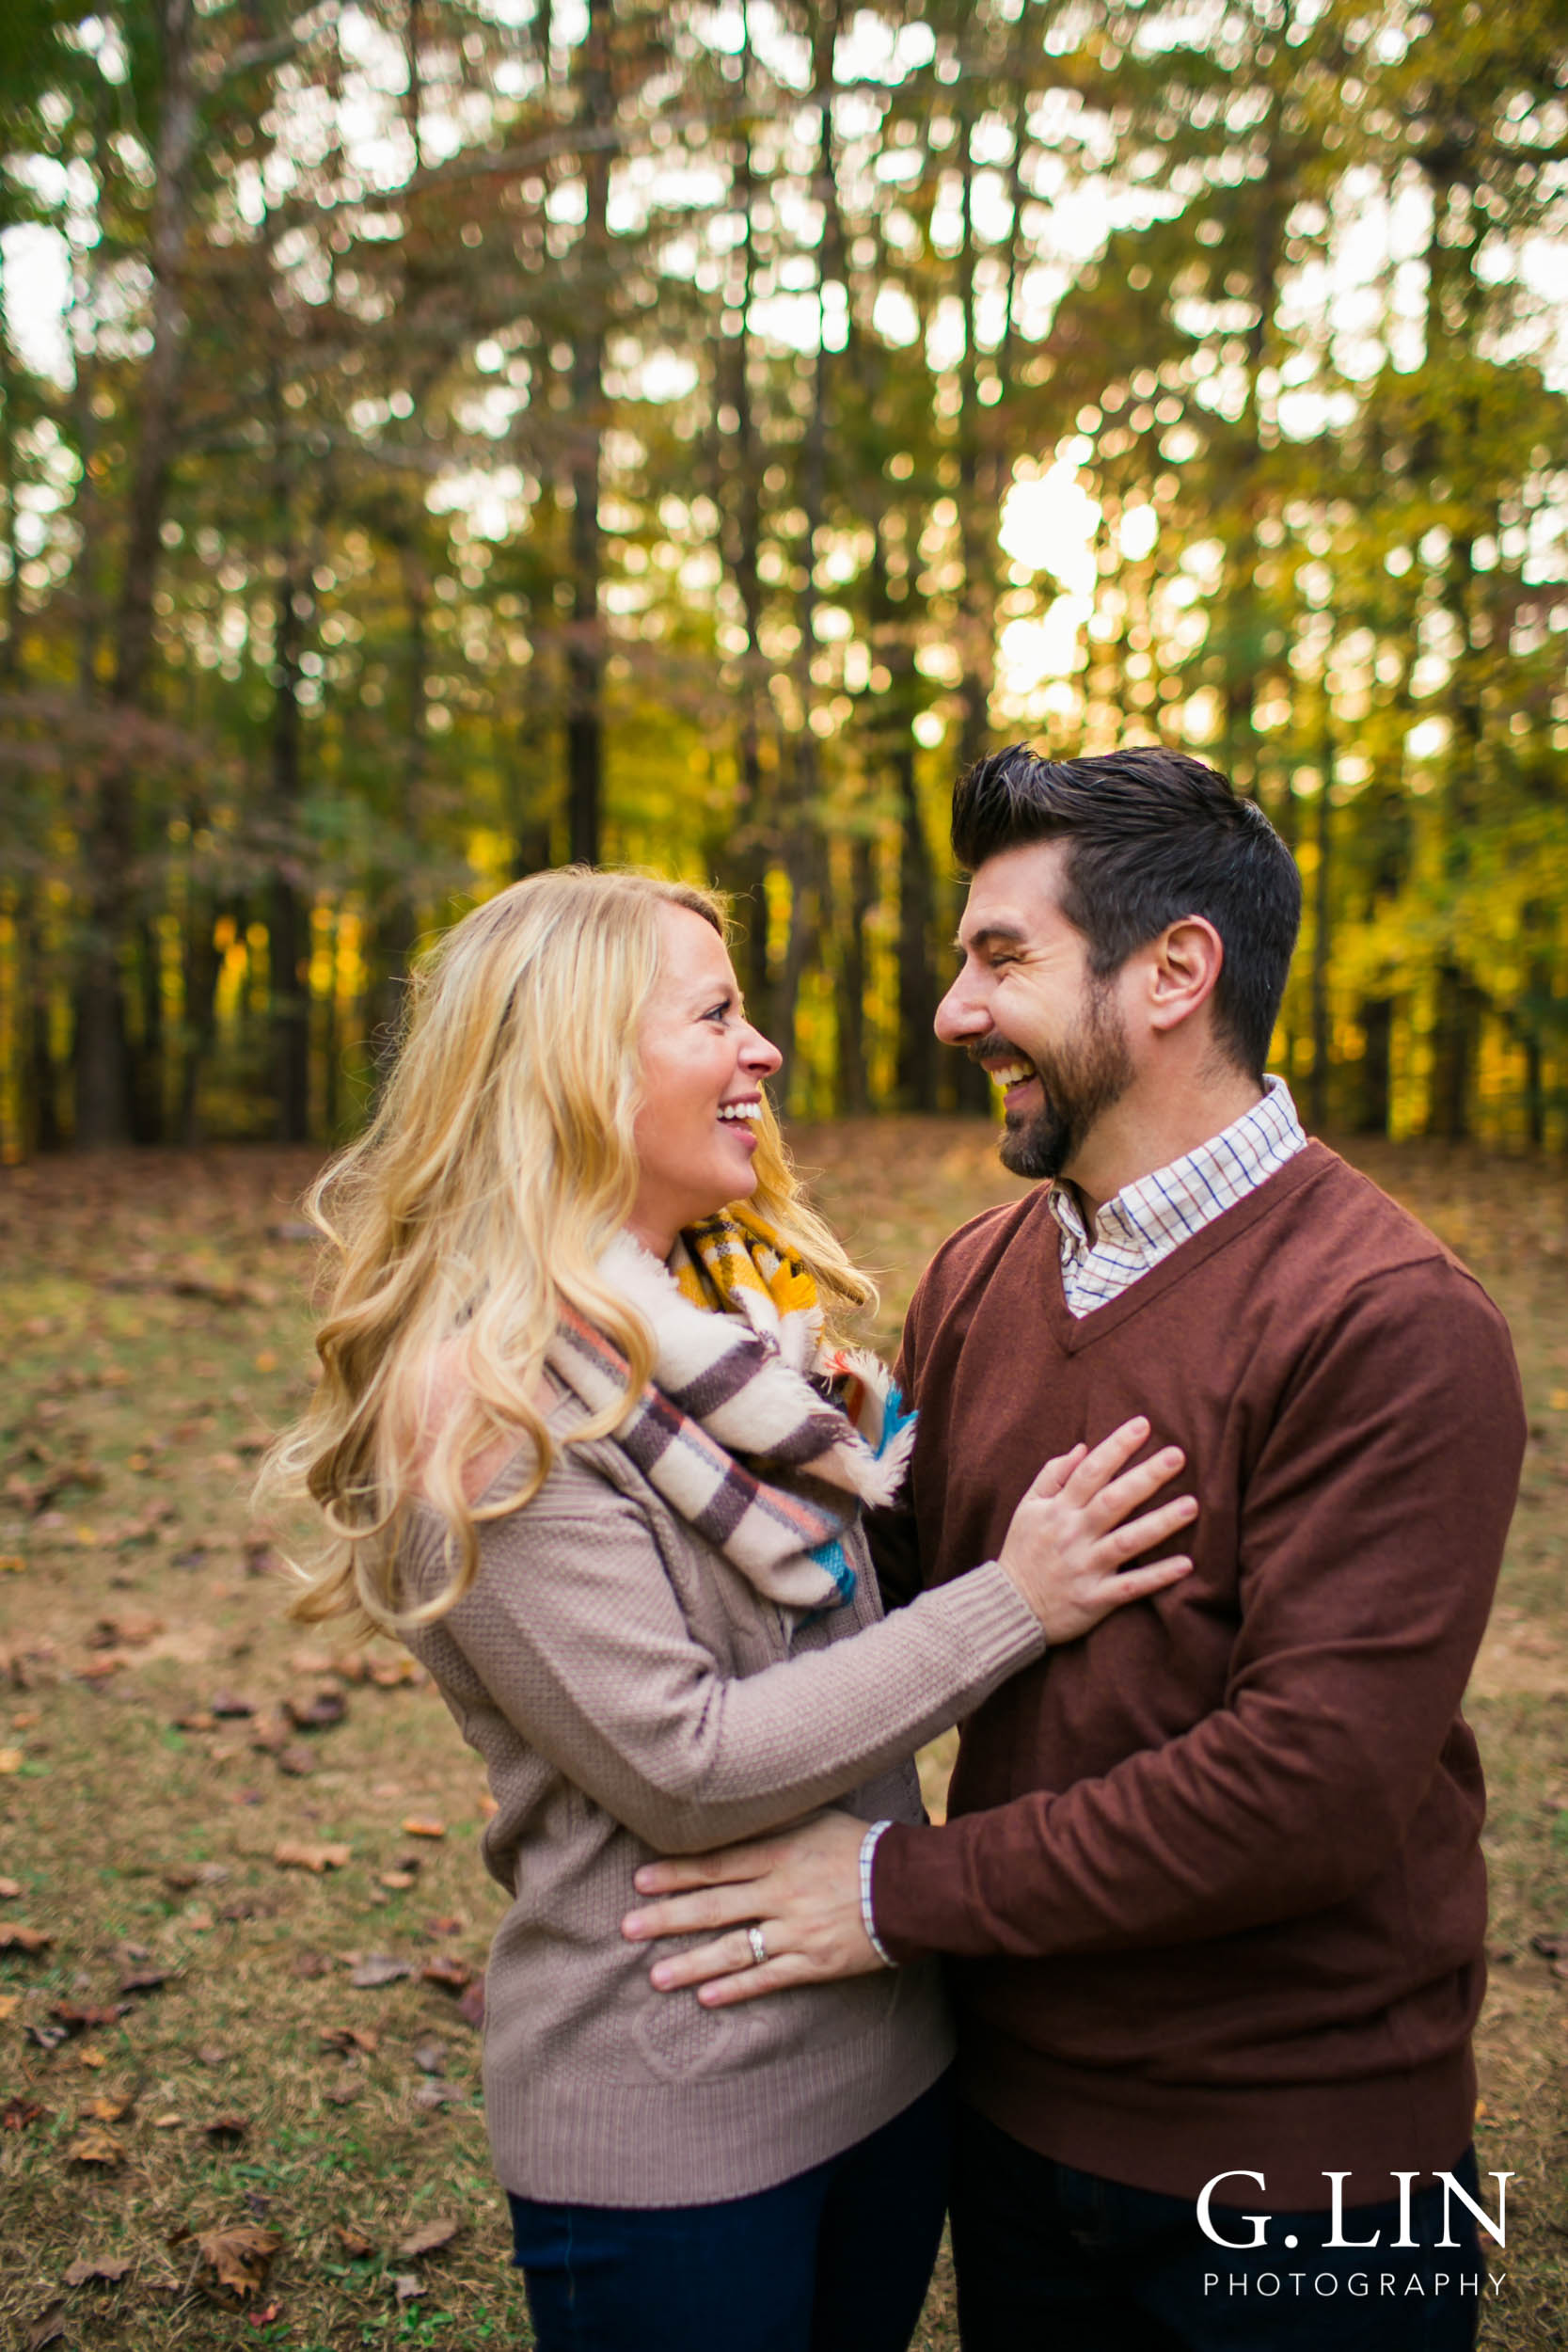 Raleigh Family Photographer | G. Lin Photography | Couple laughing together at Umstead park